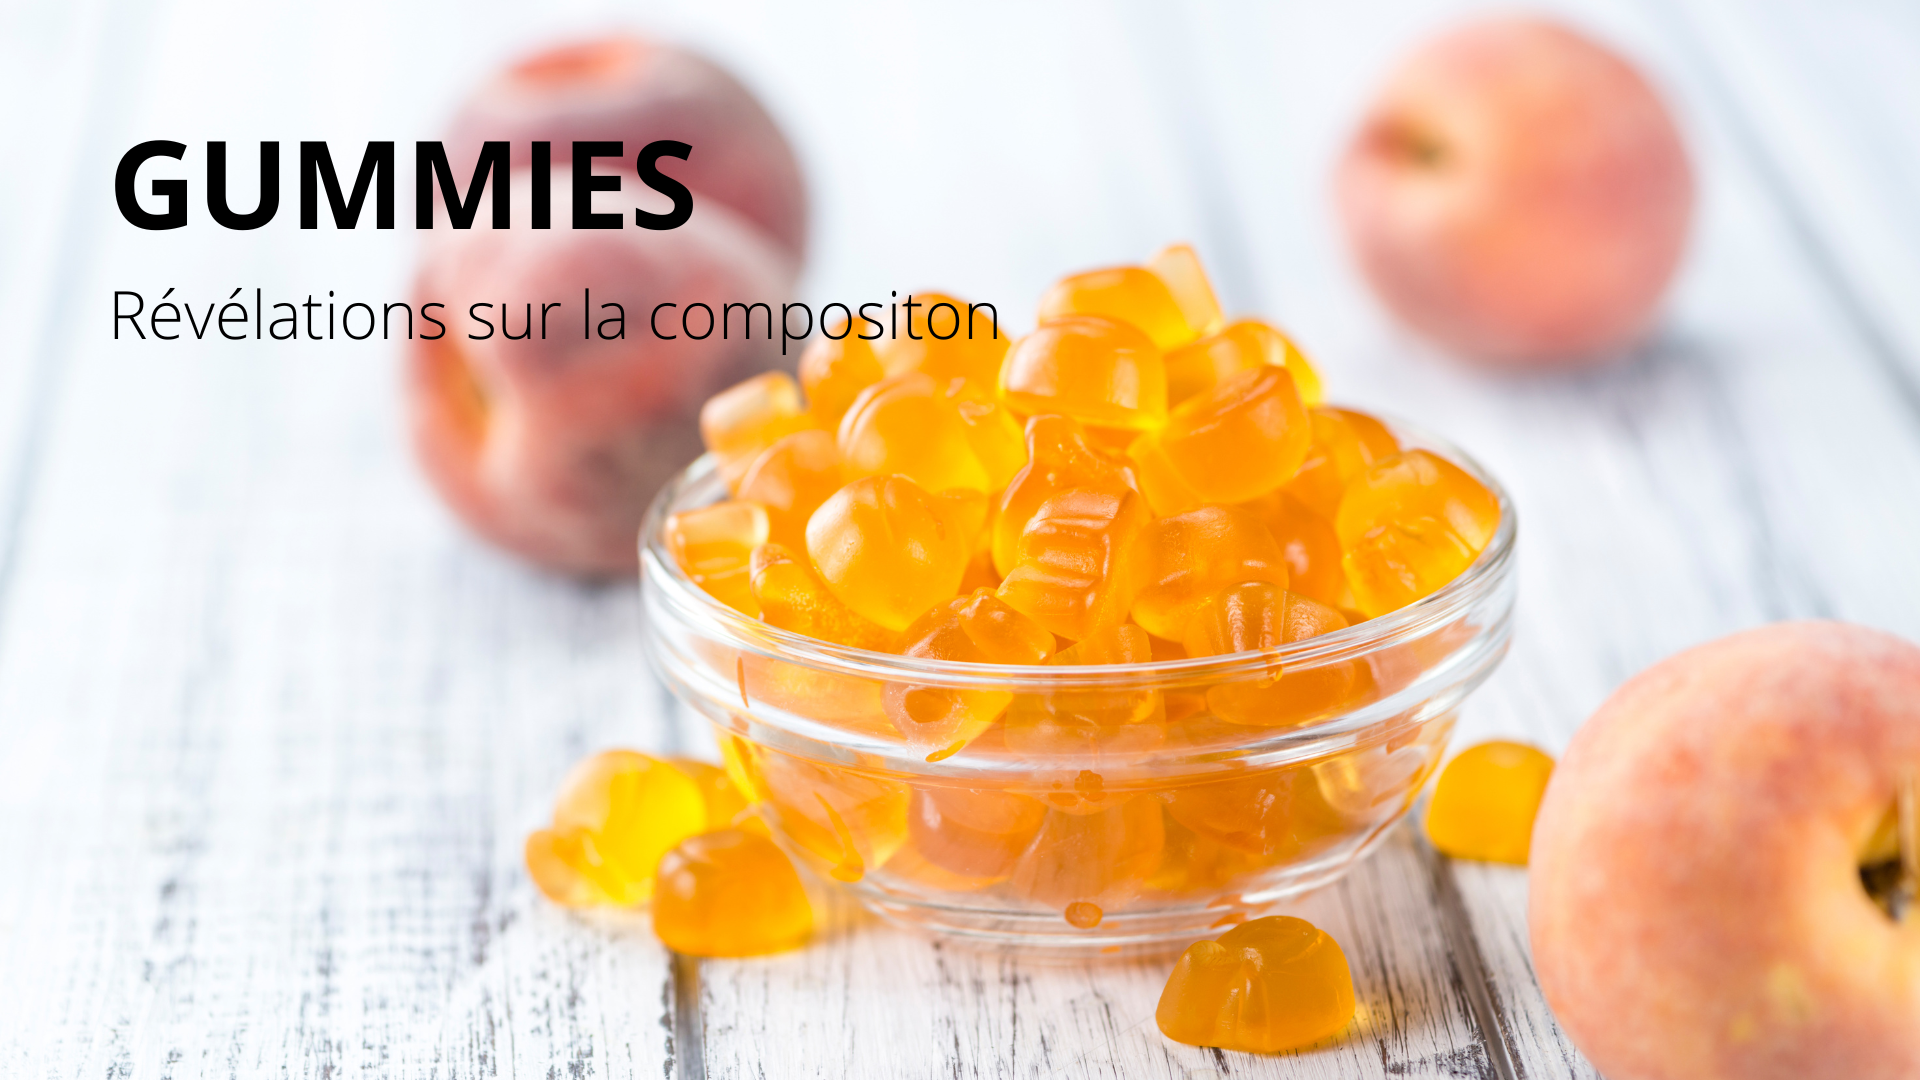 🔎Do you really know what gummies are made of?